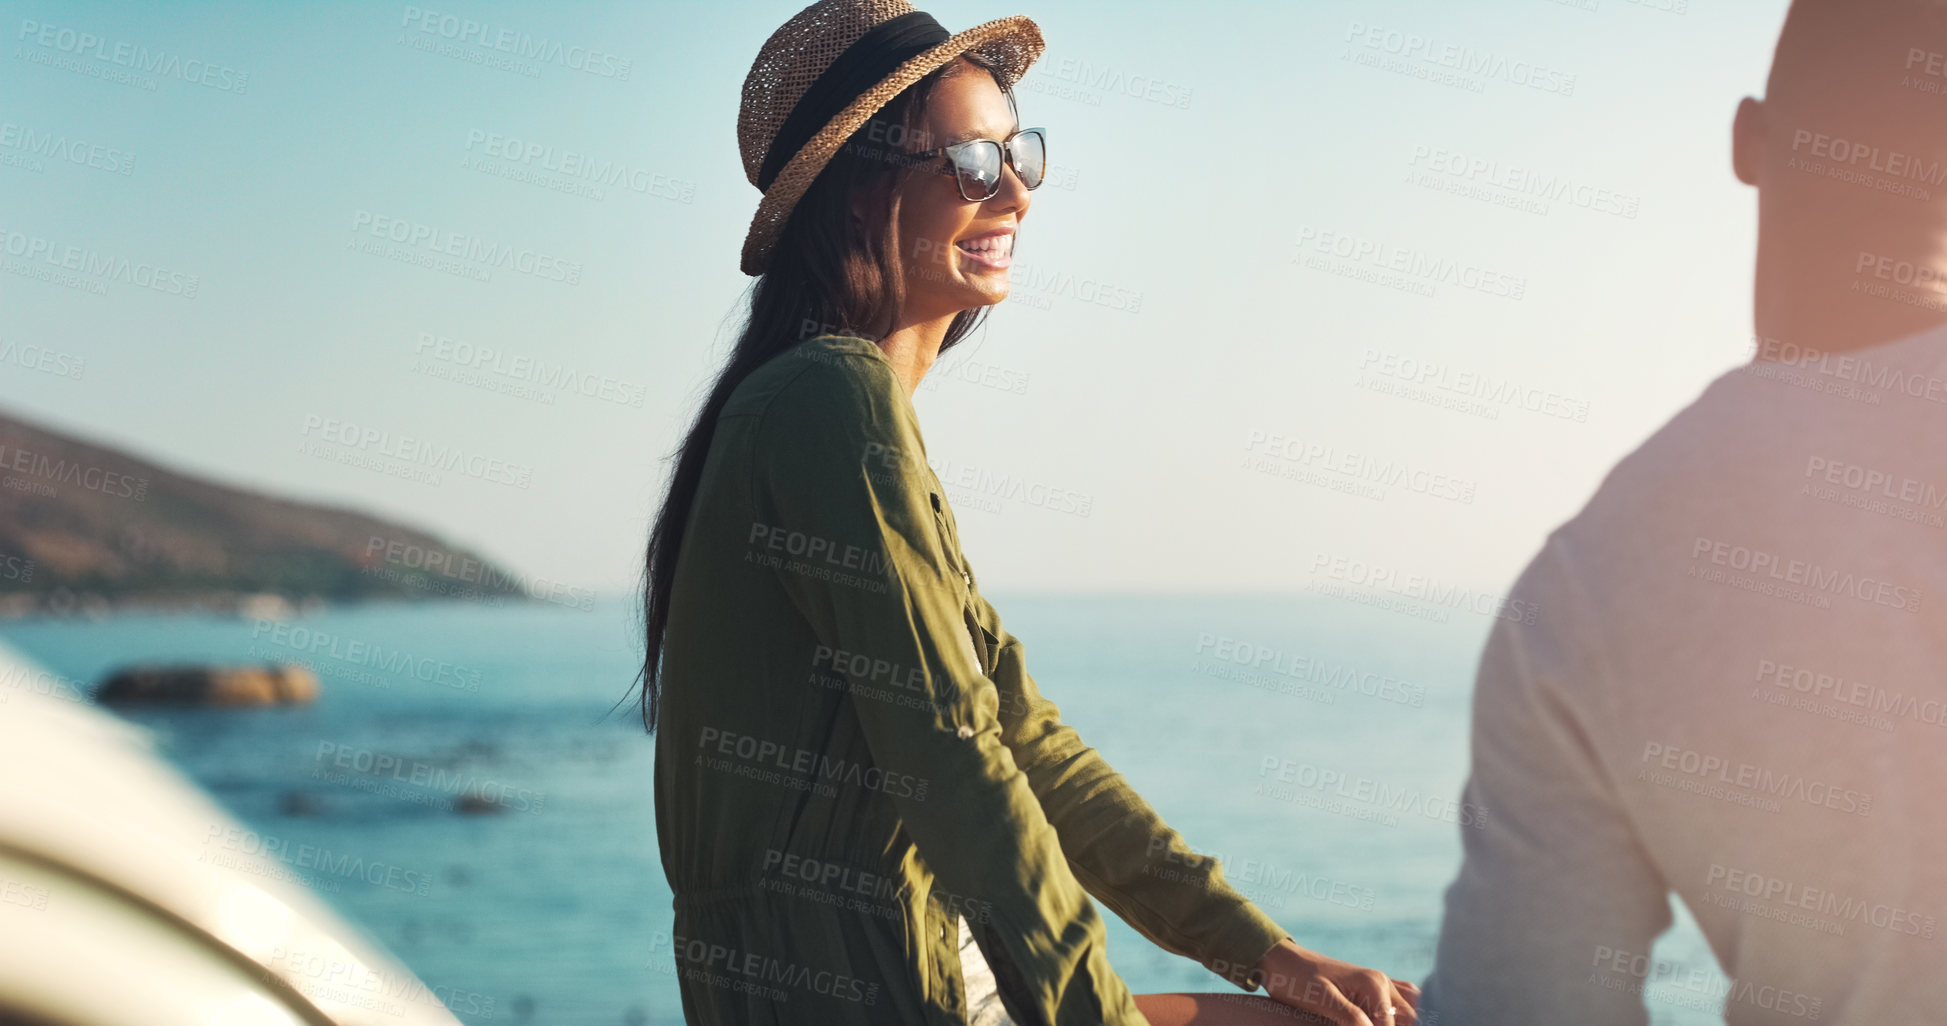 Buy stock photo Cropped shot of a young couple making a stop at the beach while out on a road trip